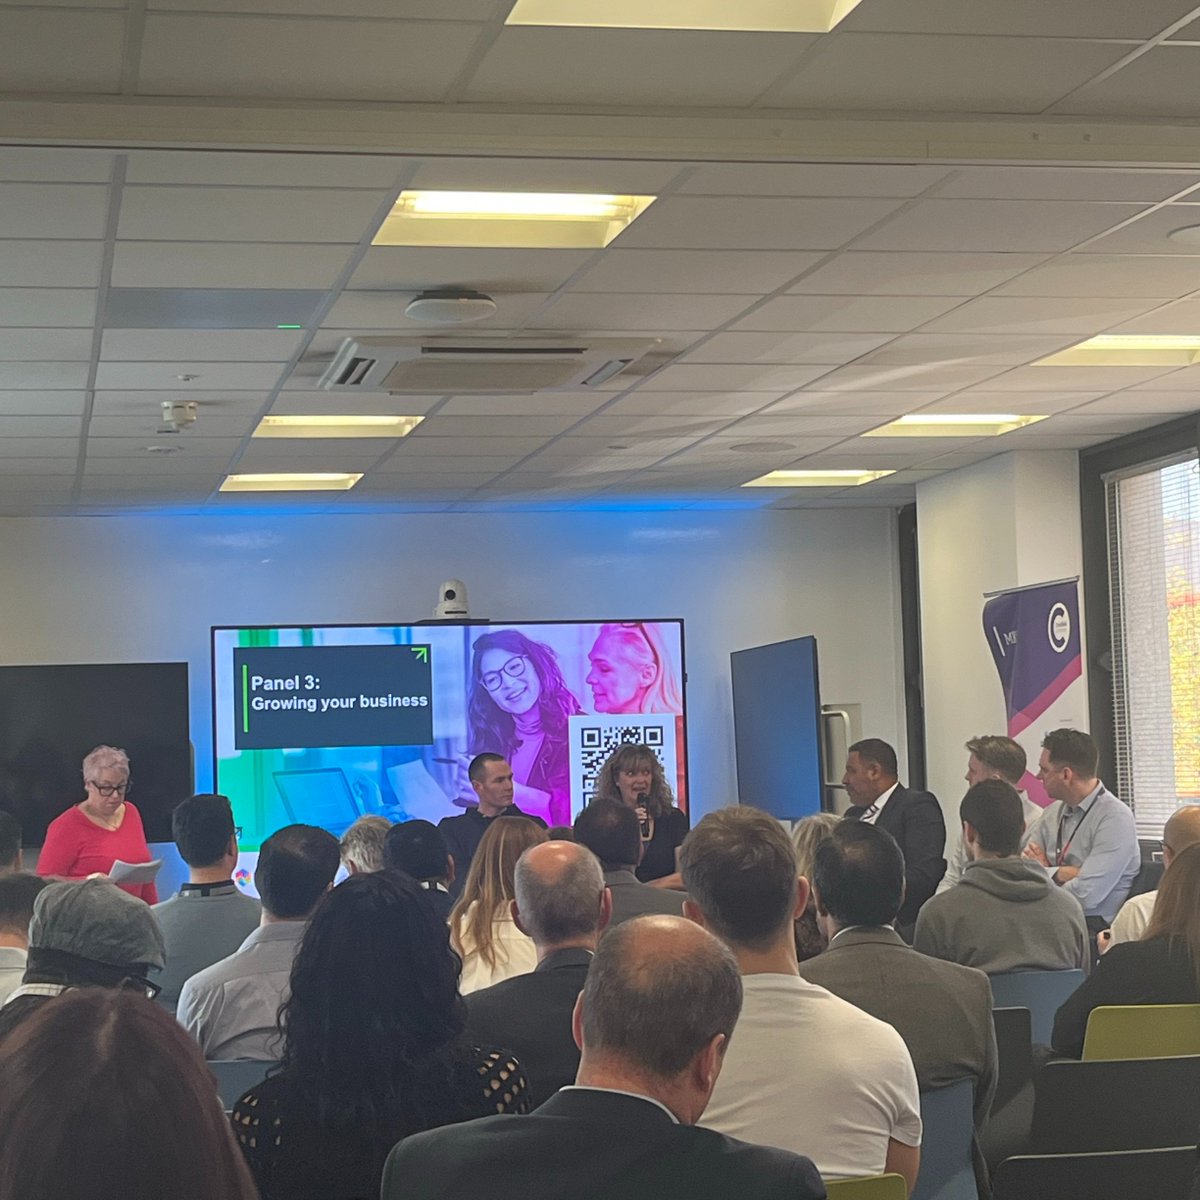 Yesterday's first ever BusinessFest was an absolute success! We want to extend a heartfelt thank you to all of our speakers and the attendees. Your contributions were invaluable in making BusinessFest truly inspiring 🙌 Discover our upcoming events here: semlepgrowthhub.com/events/